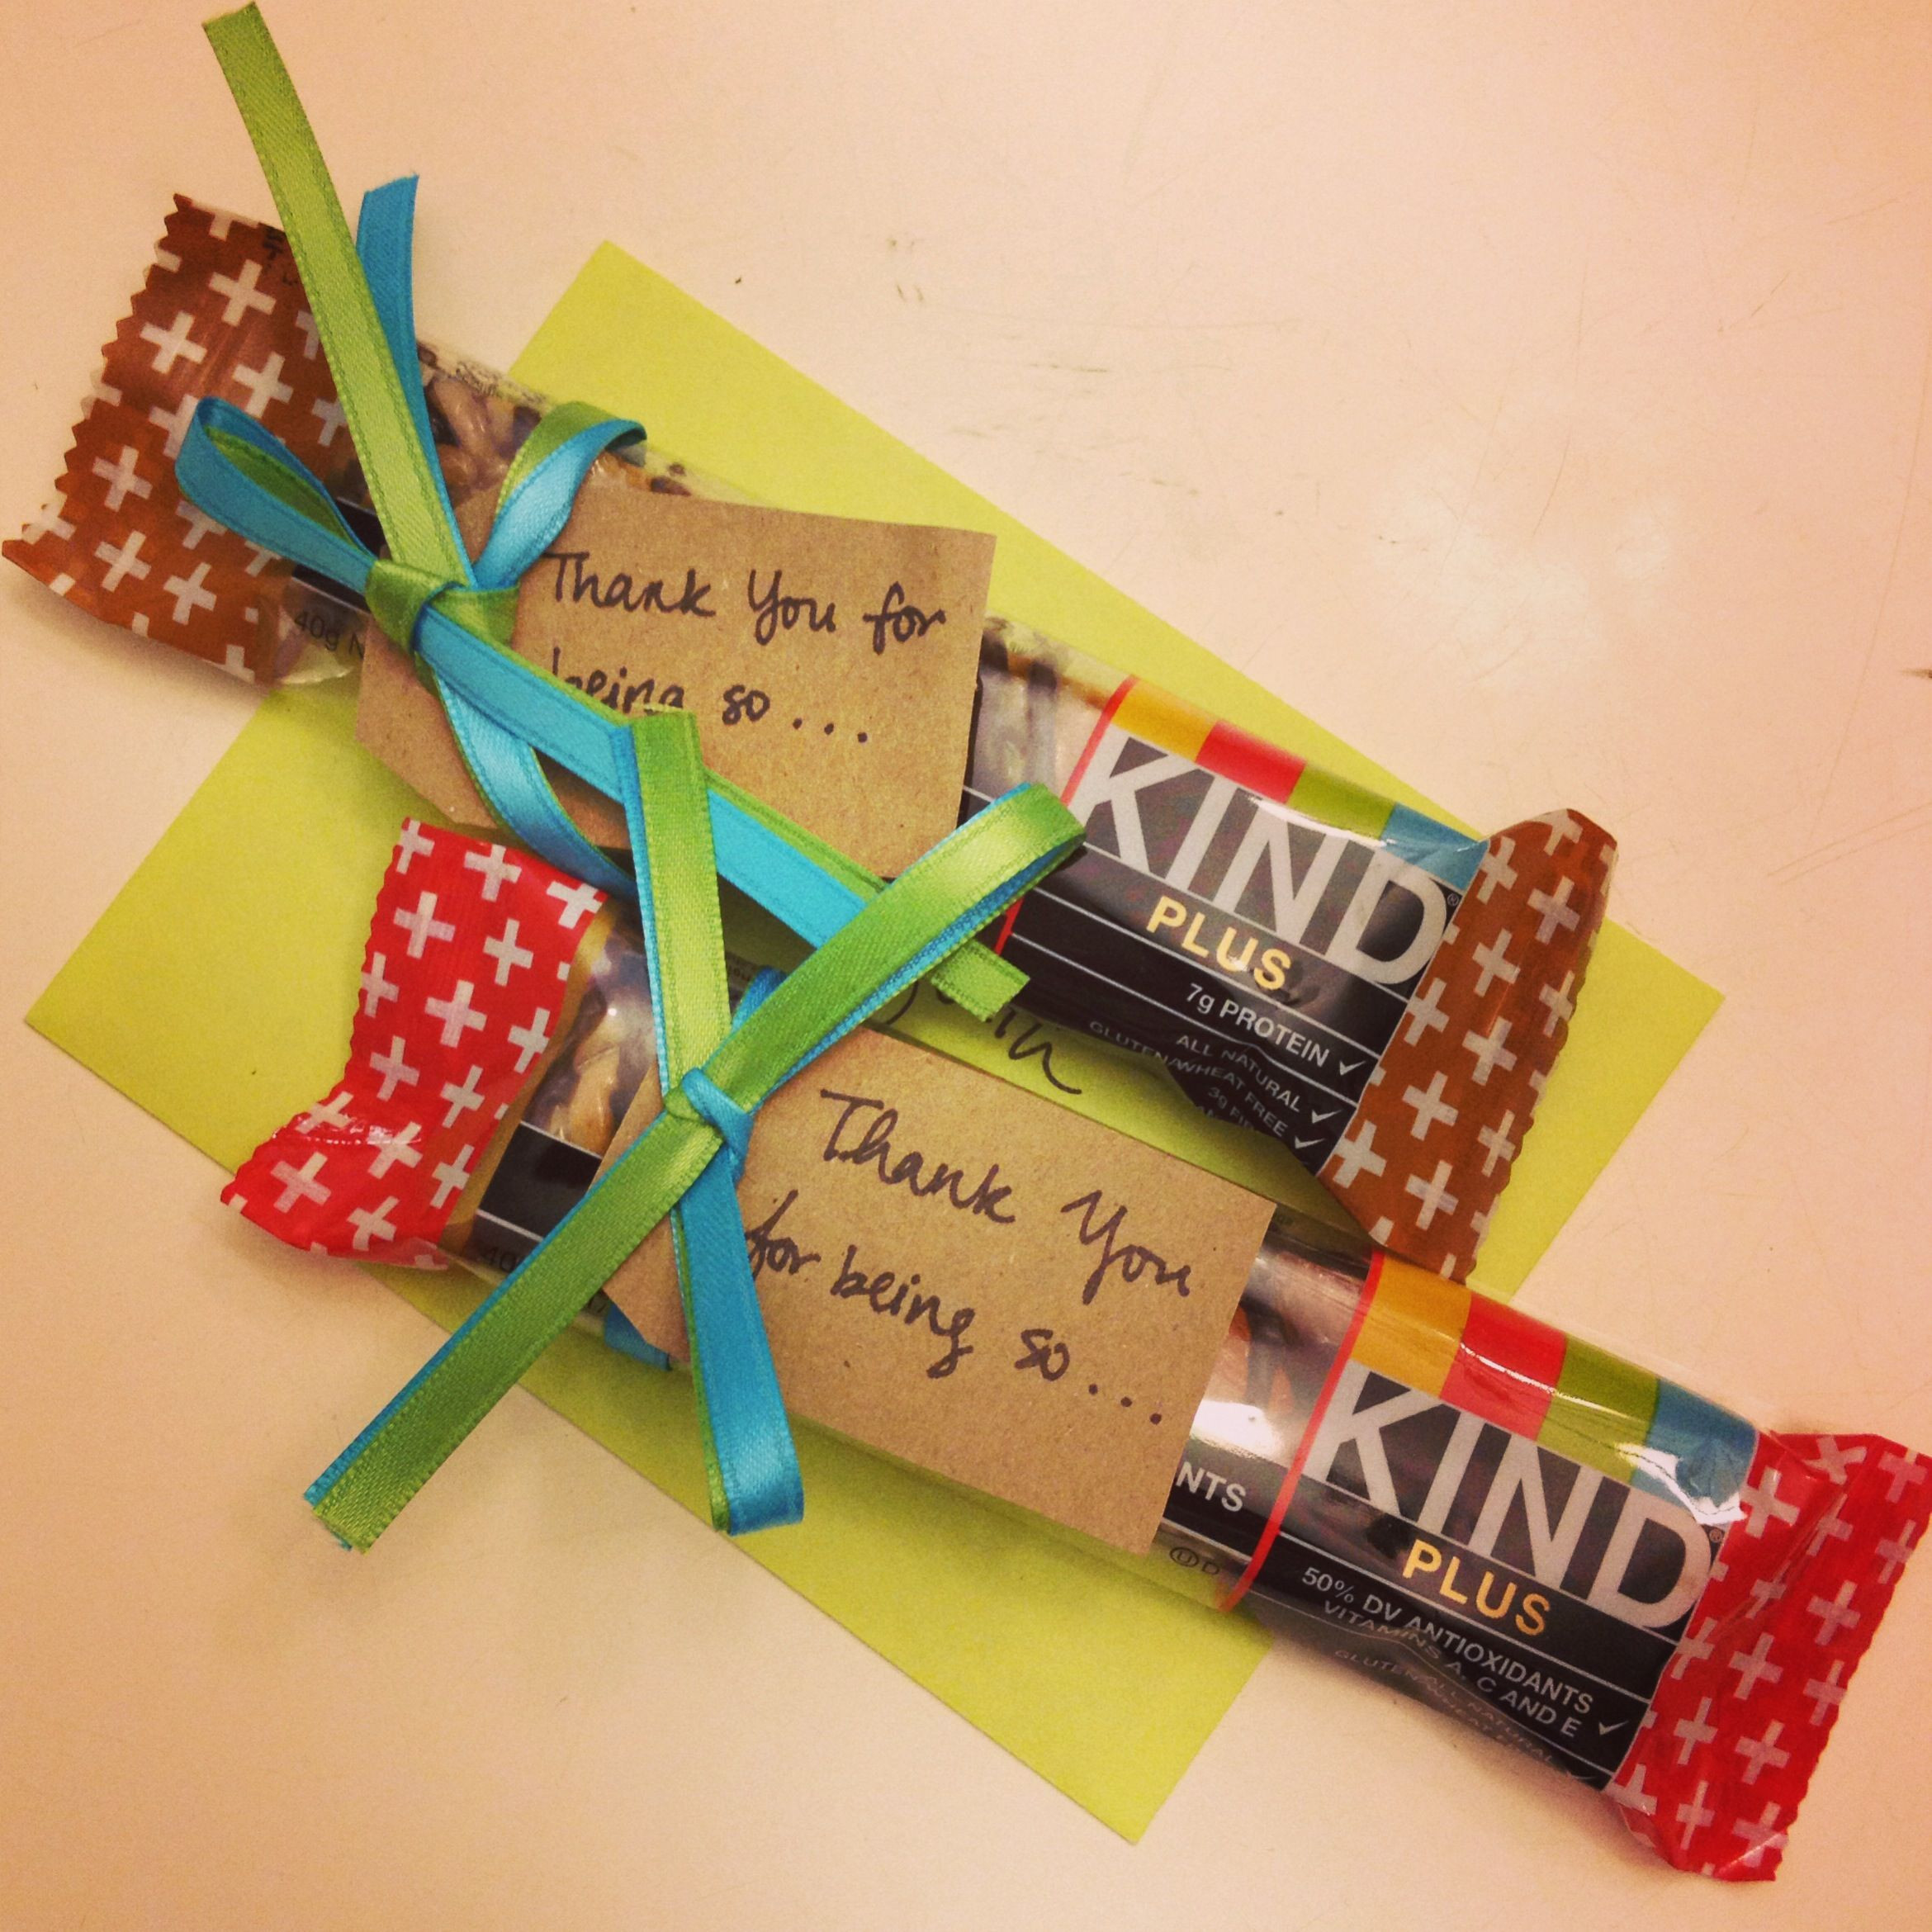 Employee Thank You Gift Ideas
 Cute thank you t idea using KIND bars